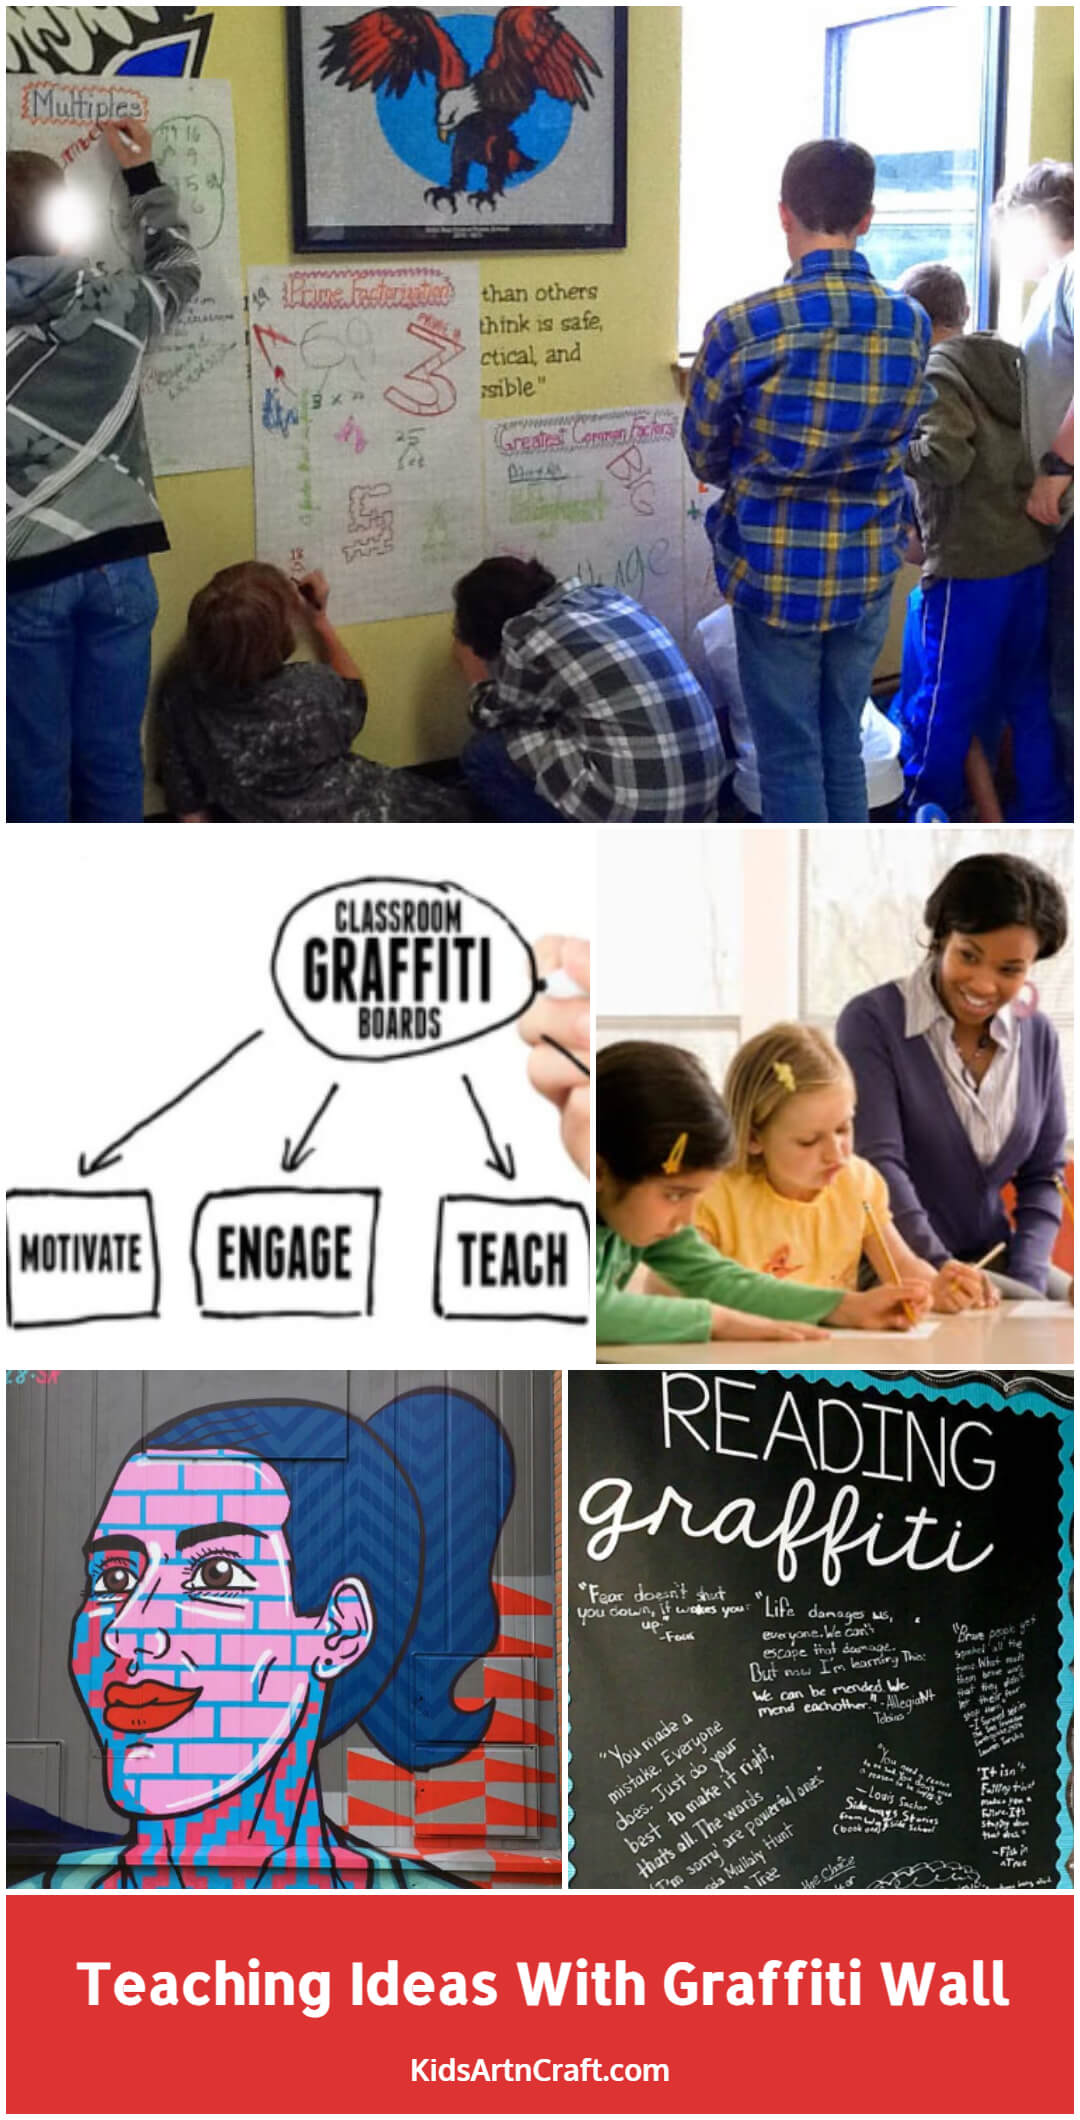 Teaching Ideas With Graffiti Wall for Kids